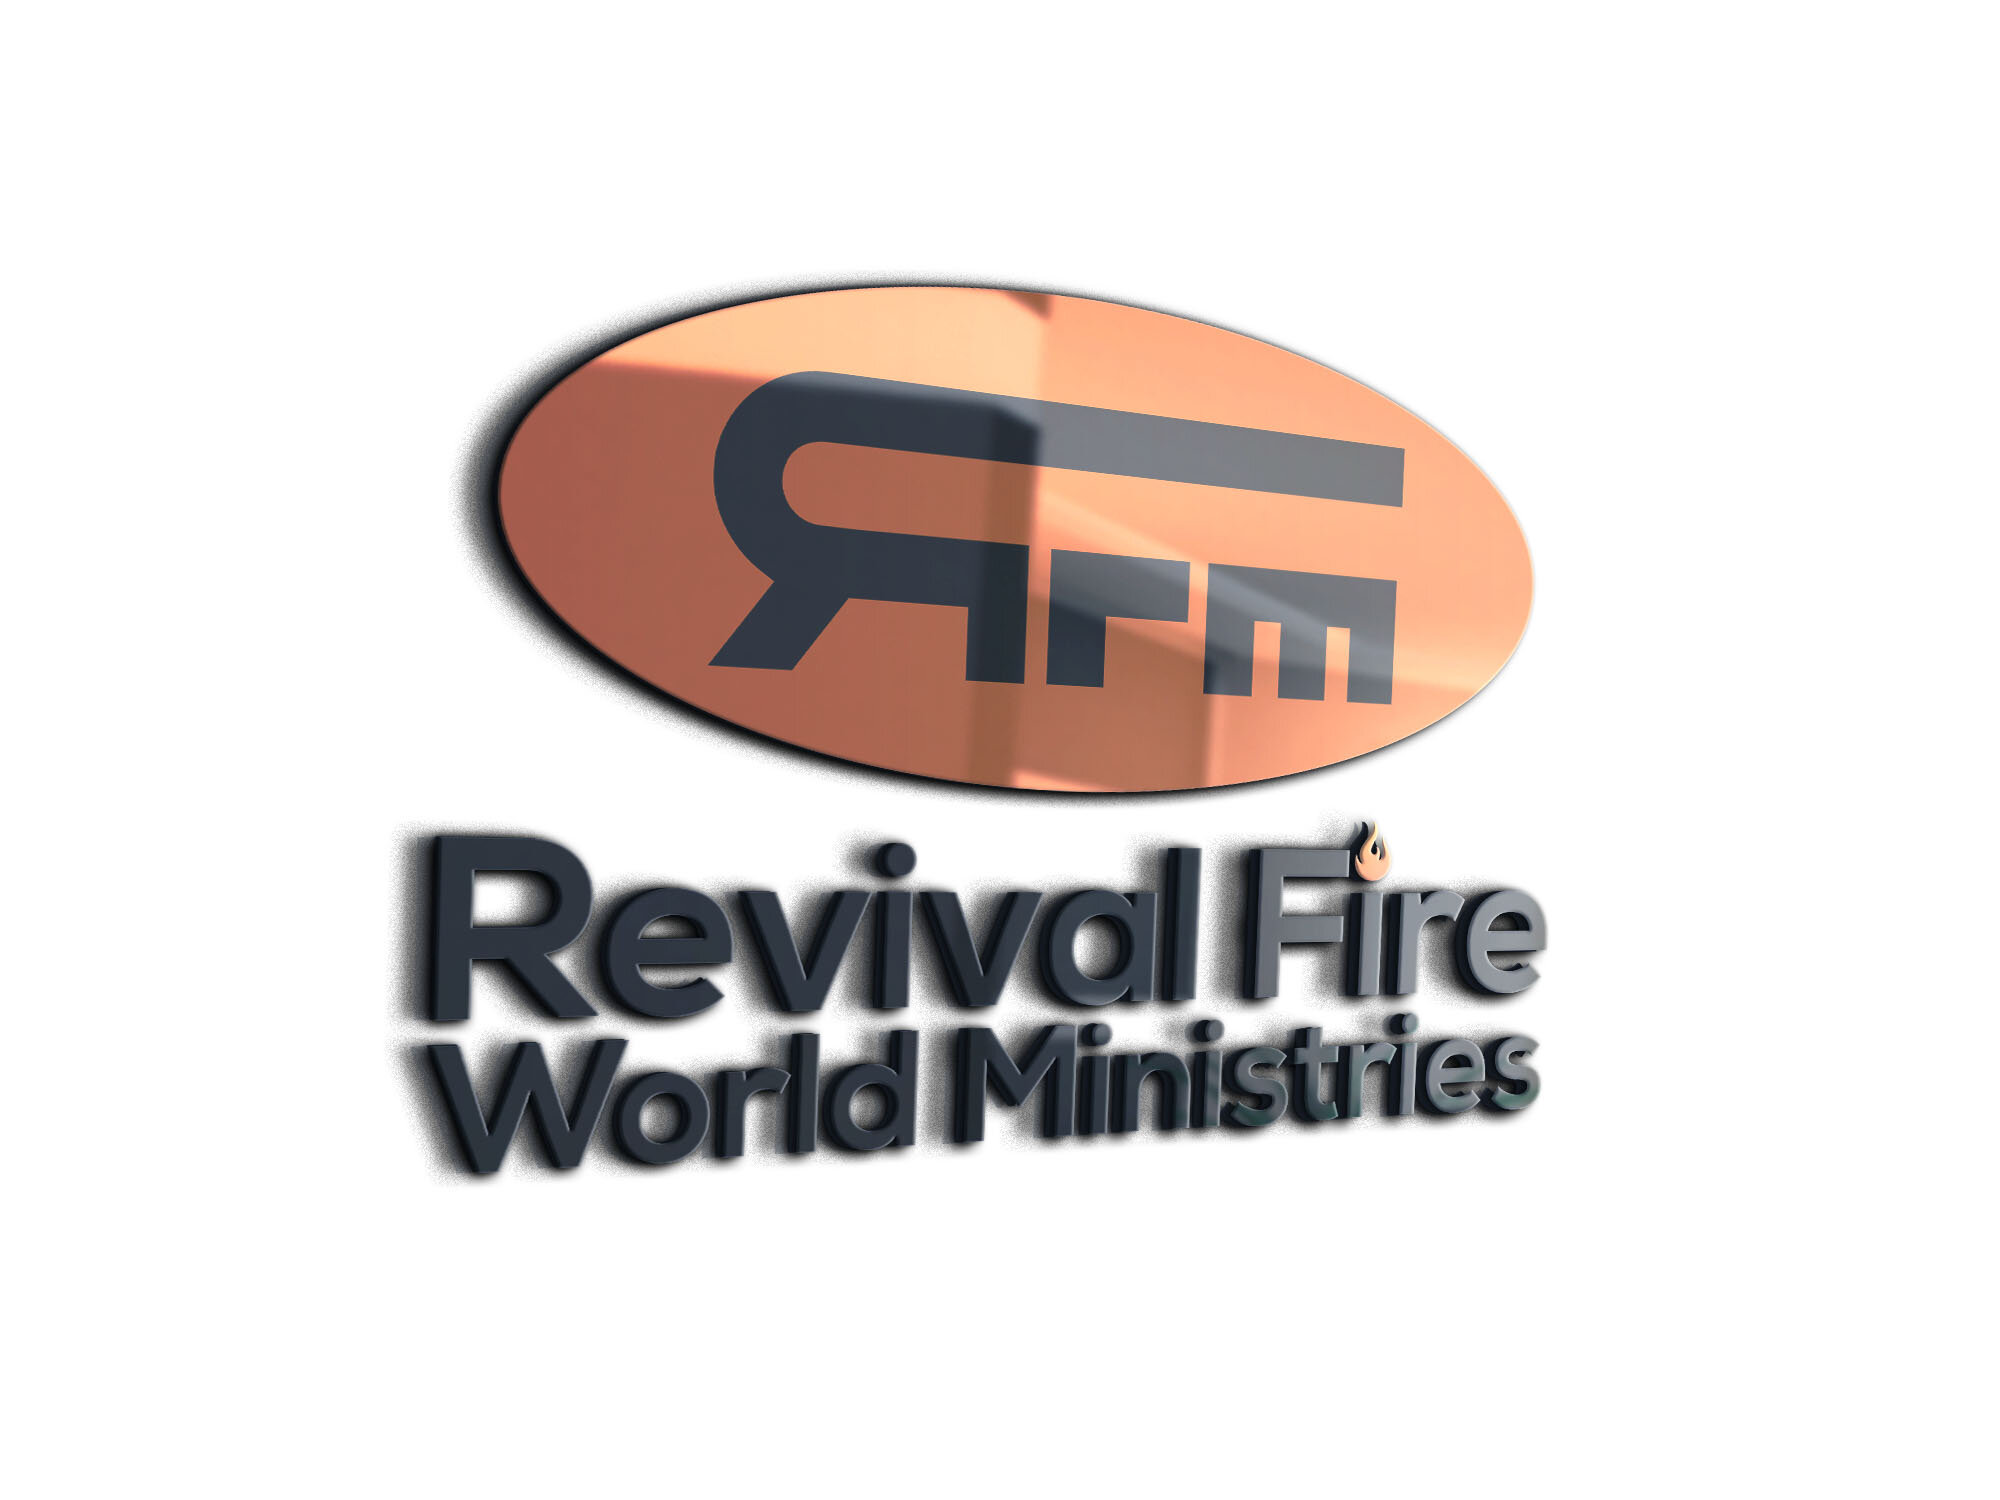 Revival Fire World Ministries